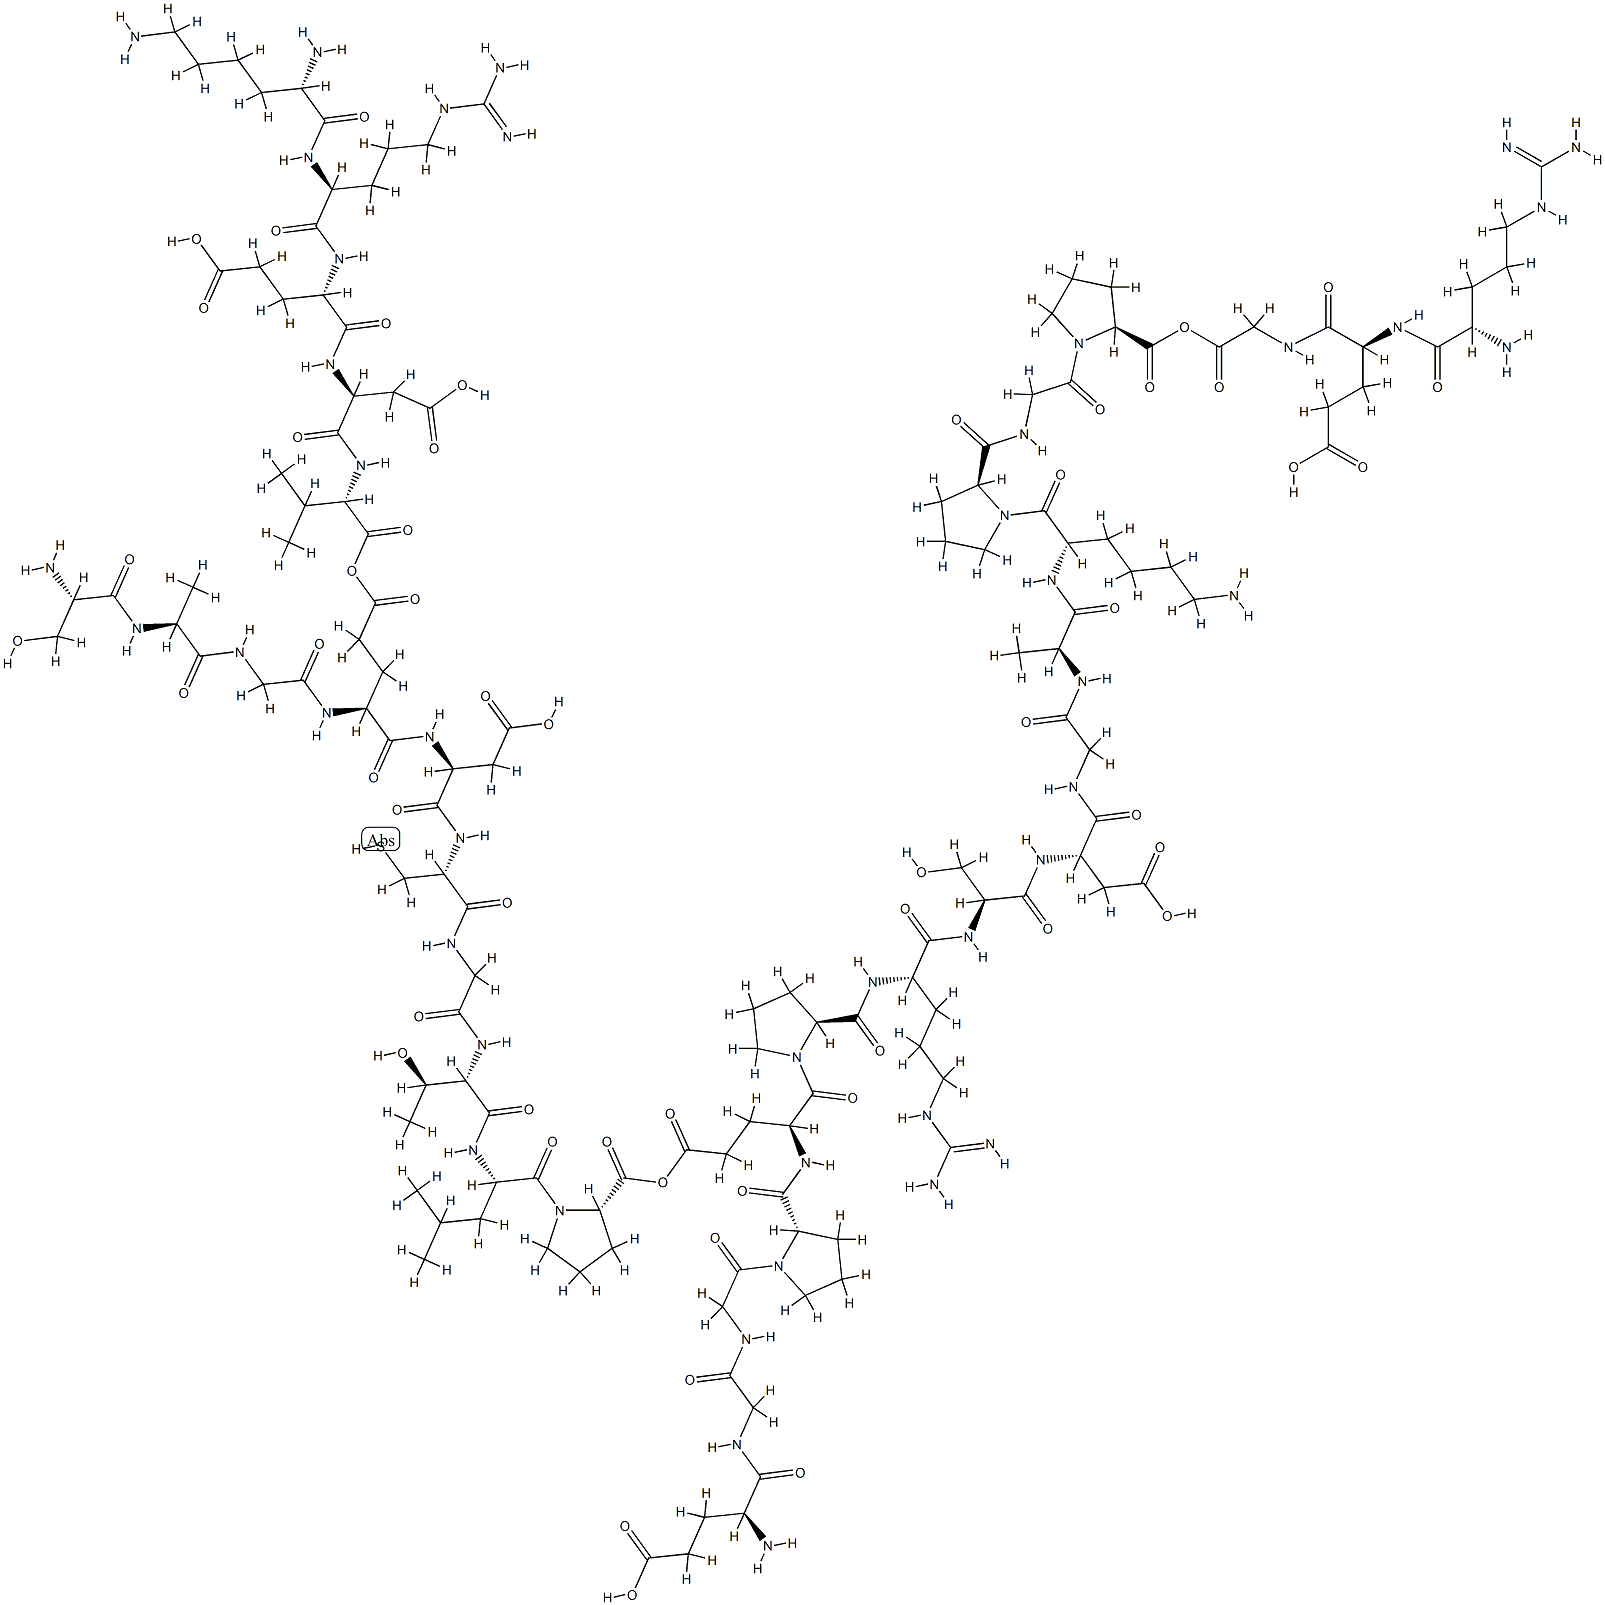 pro-opiomelanocortin human joining peptide(77-109) Structure